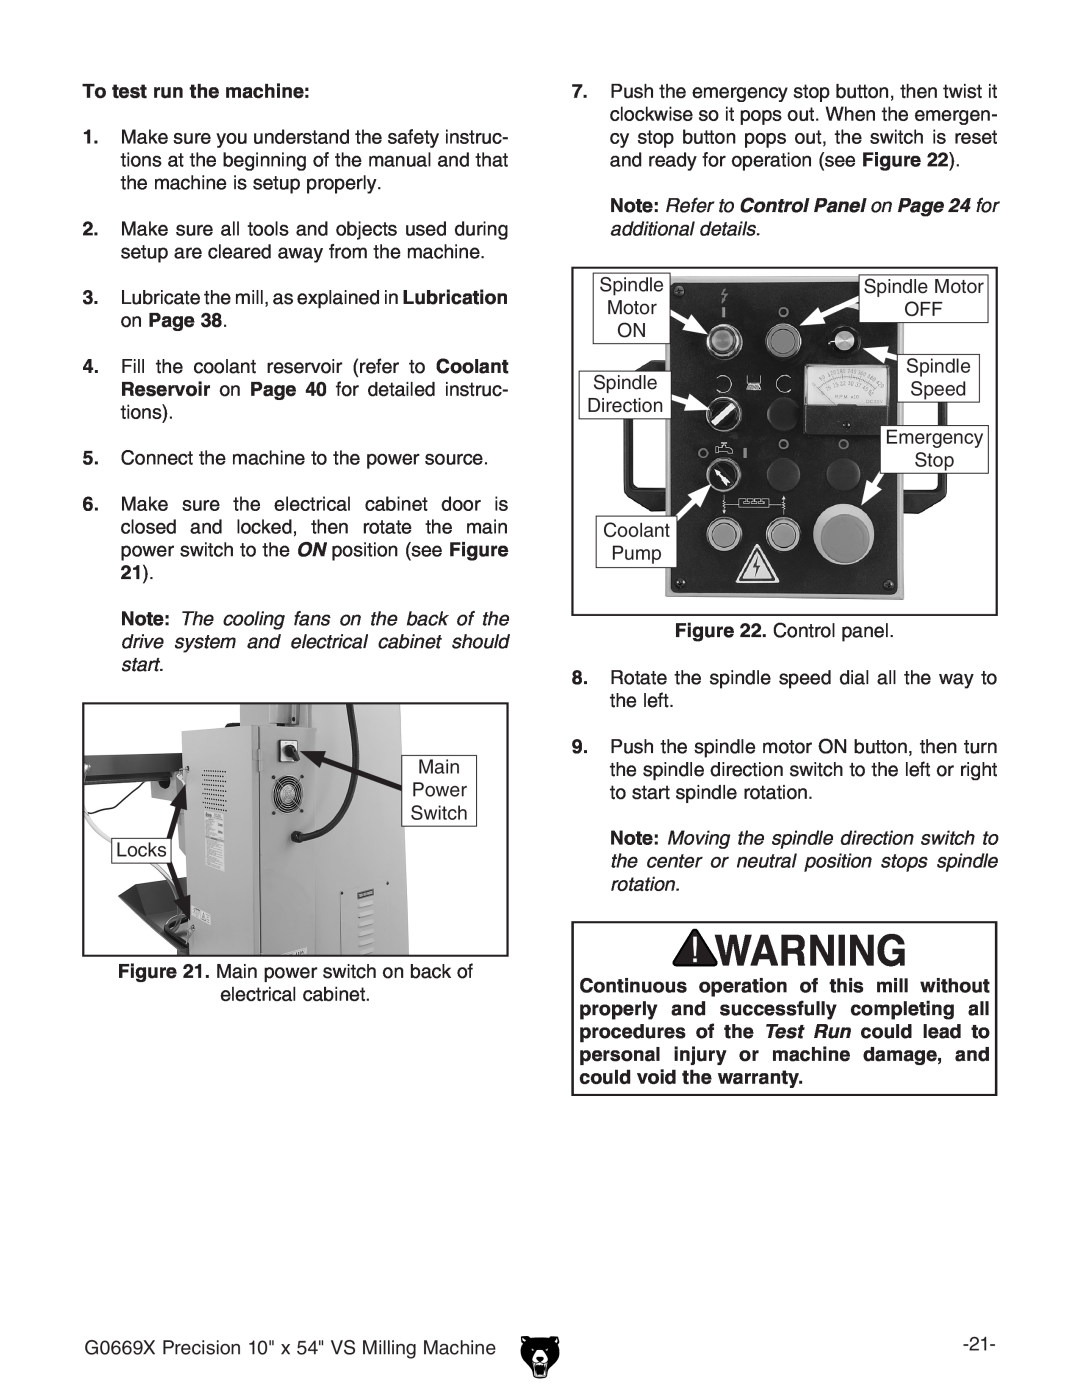 Grizzly g0669X owner manual To test run the machine, Note Refer to Control Panel on Page 24 for additional details 